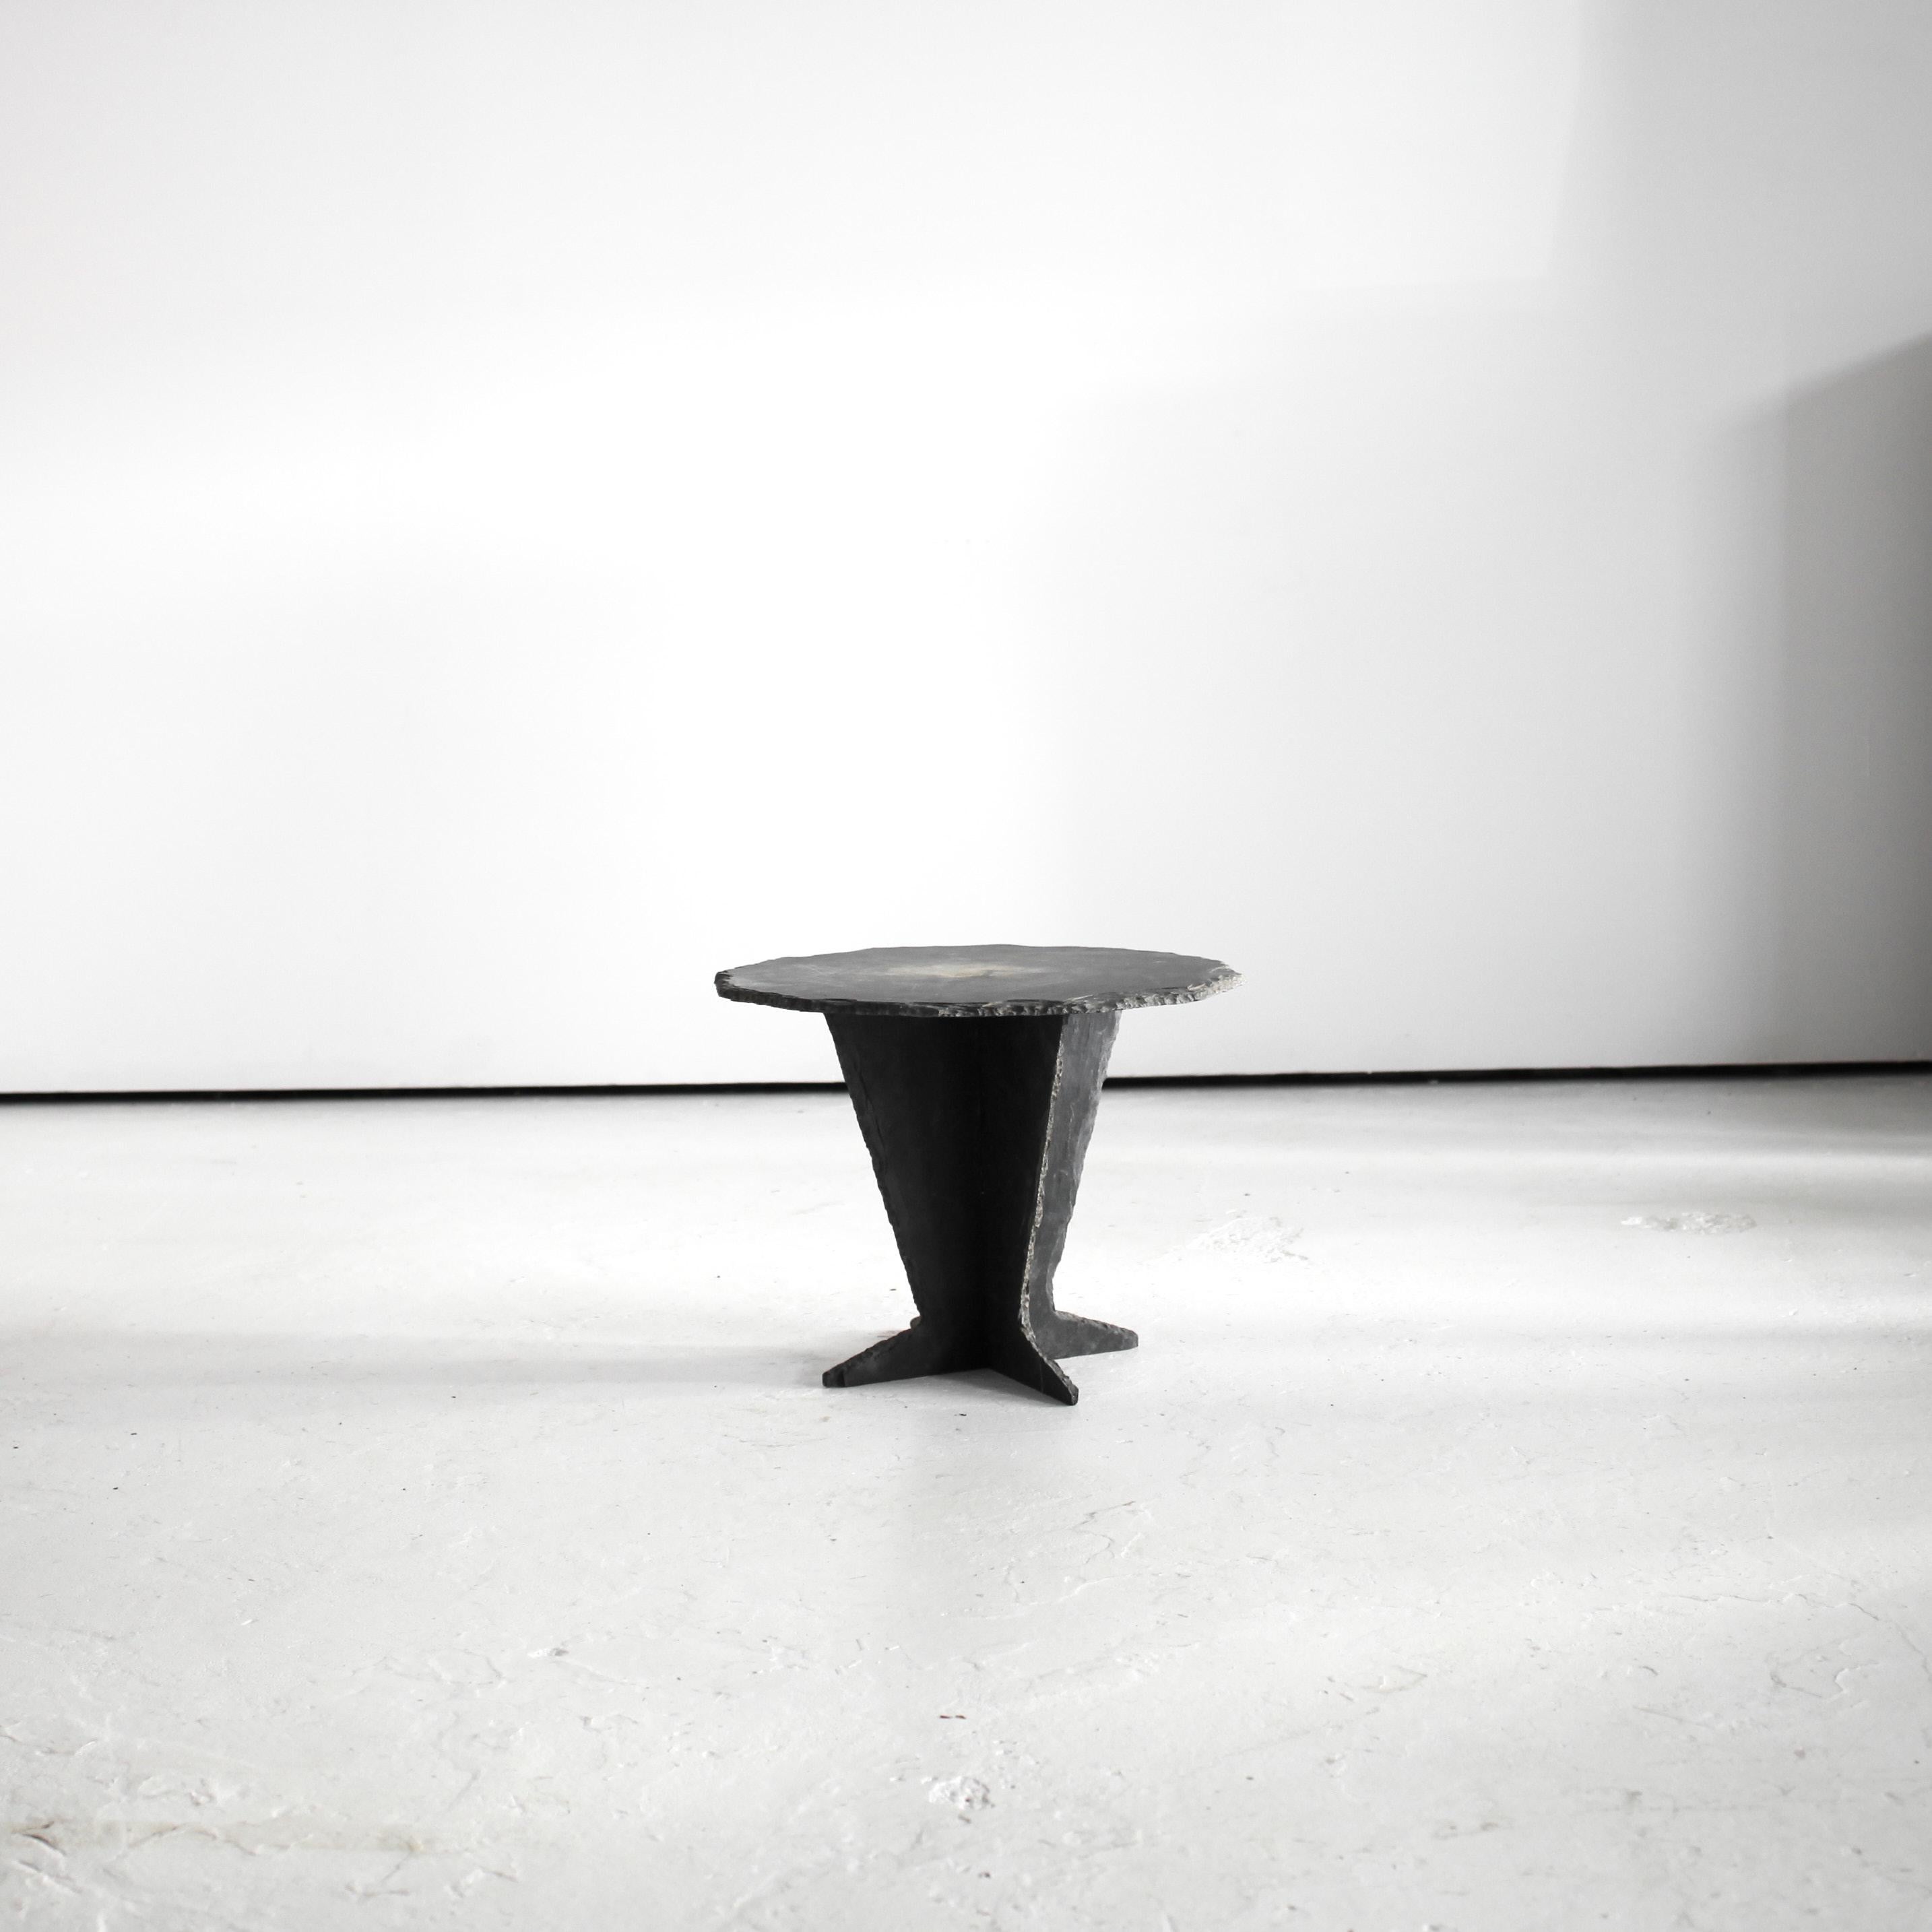 A primitive slate side table from the Angers region of France.

Made in the 1940s or 50s by a slate quarry worker.